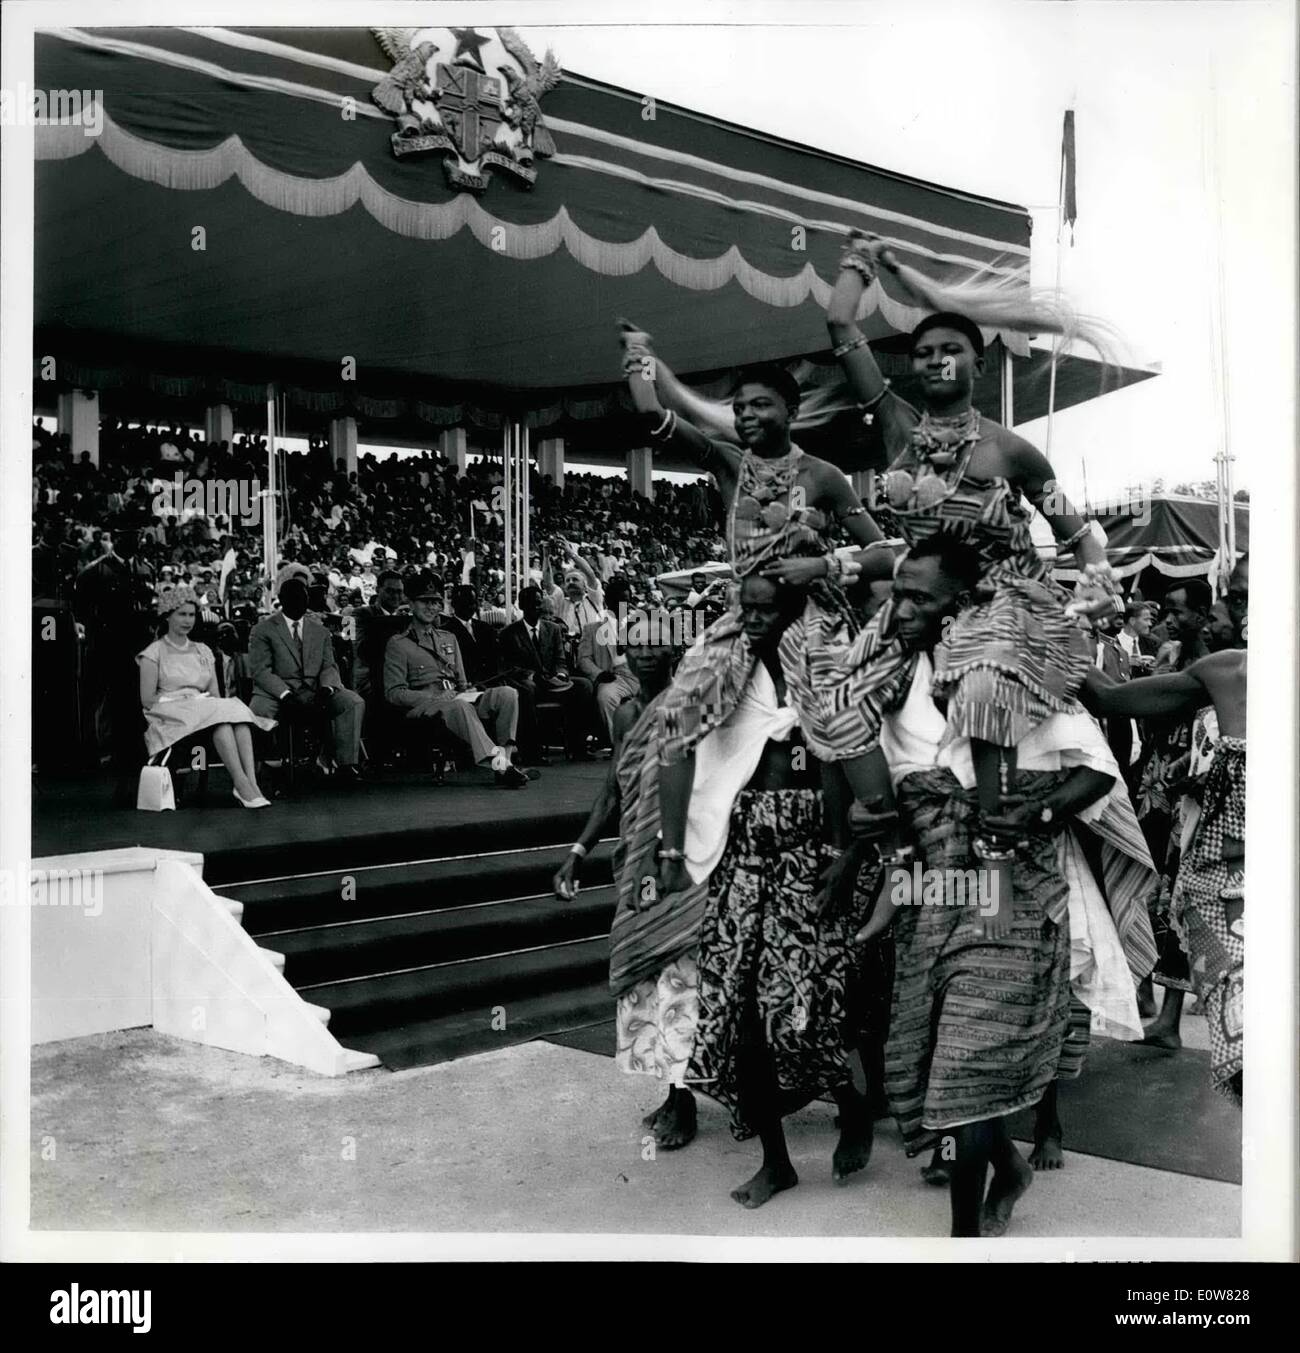 Image of Elizabeth II in Ghana, 1961 by Unknown photographer, (20th century)